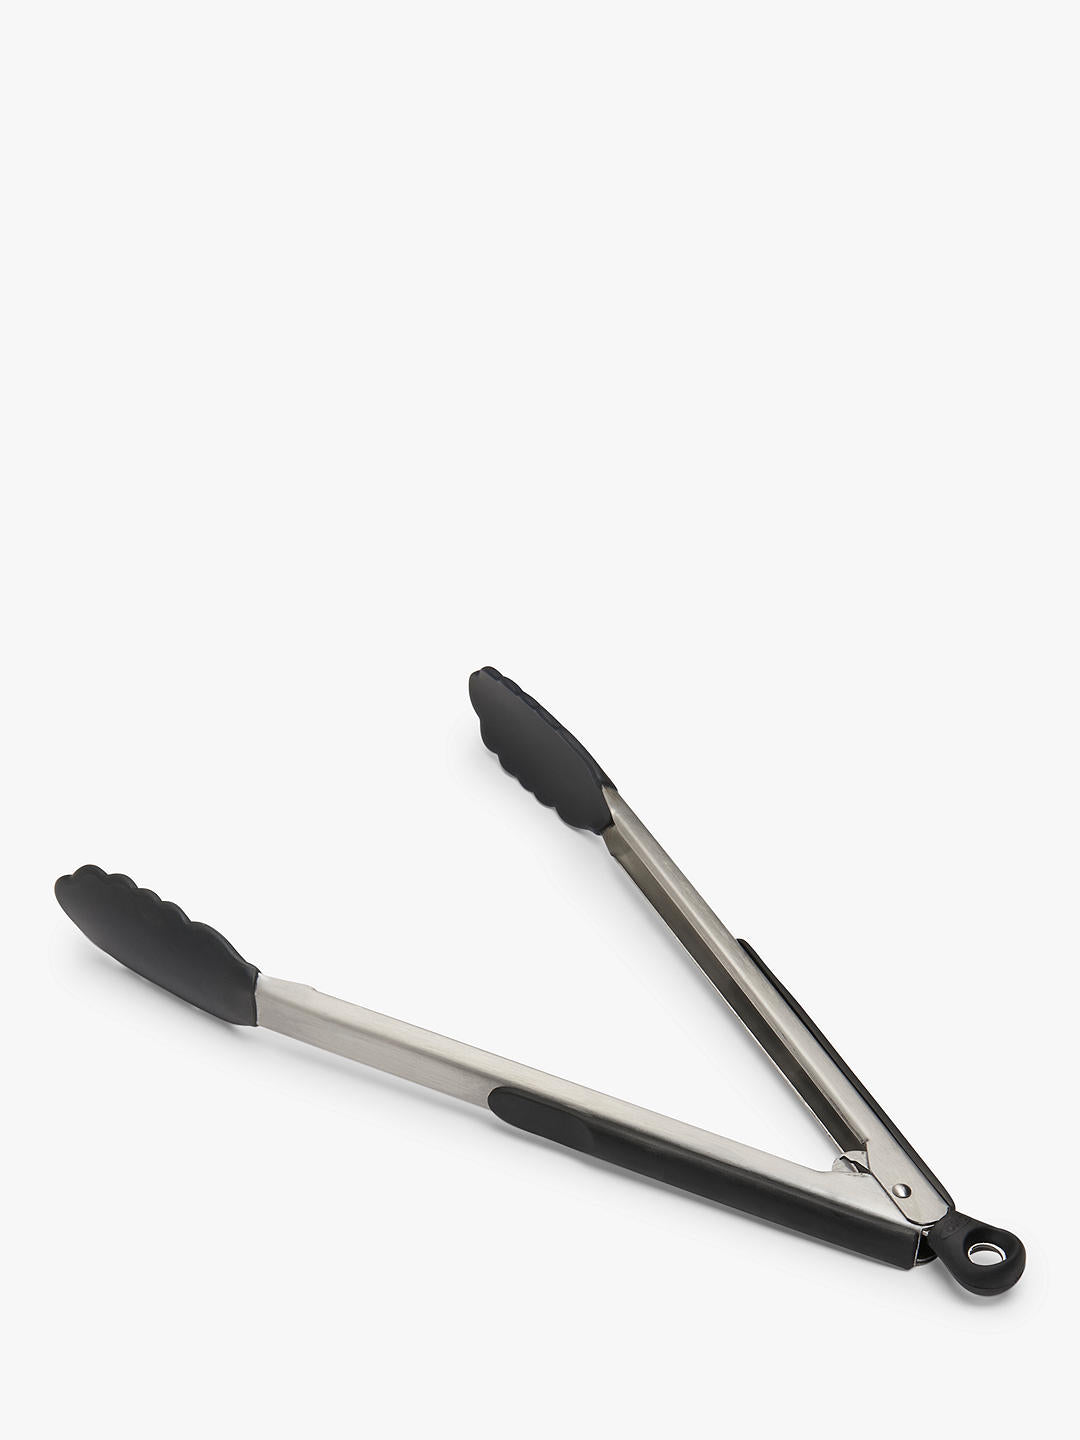 Oxo Good grips - 12" Locking Tongs with Silicone